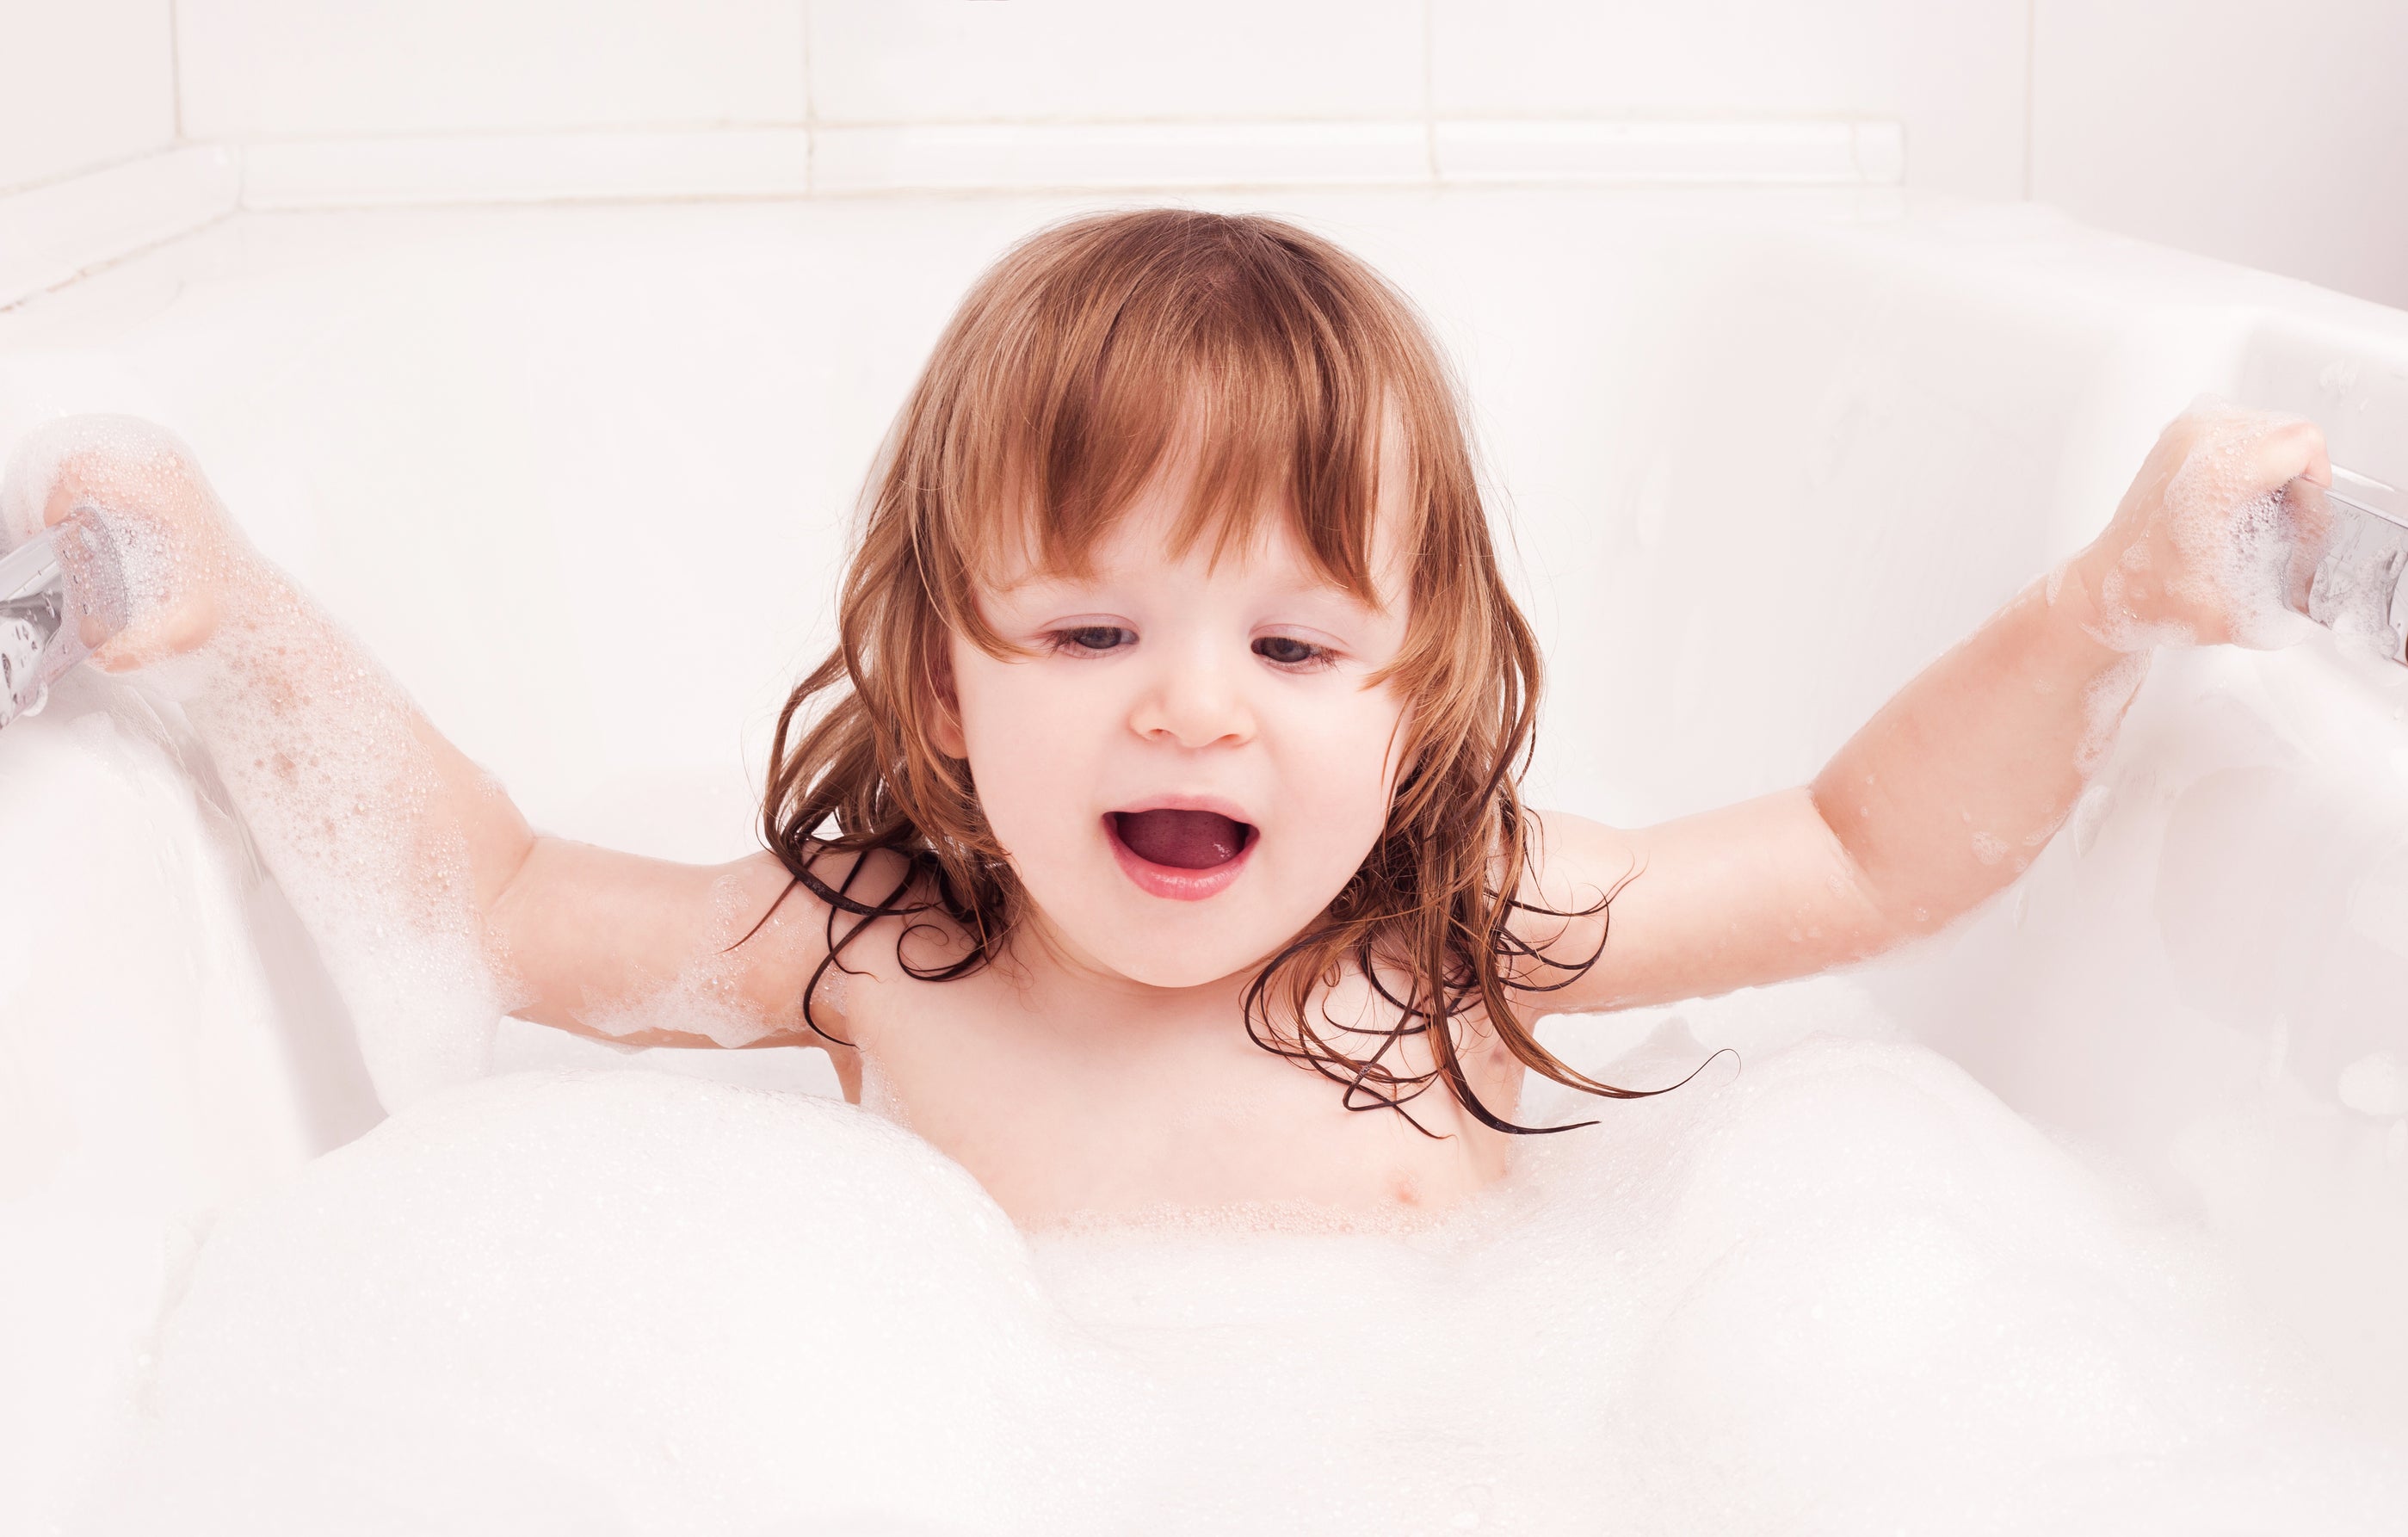 How To Make Bath Time Fun For Toddlers